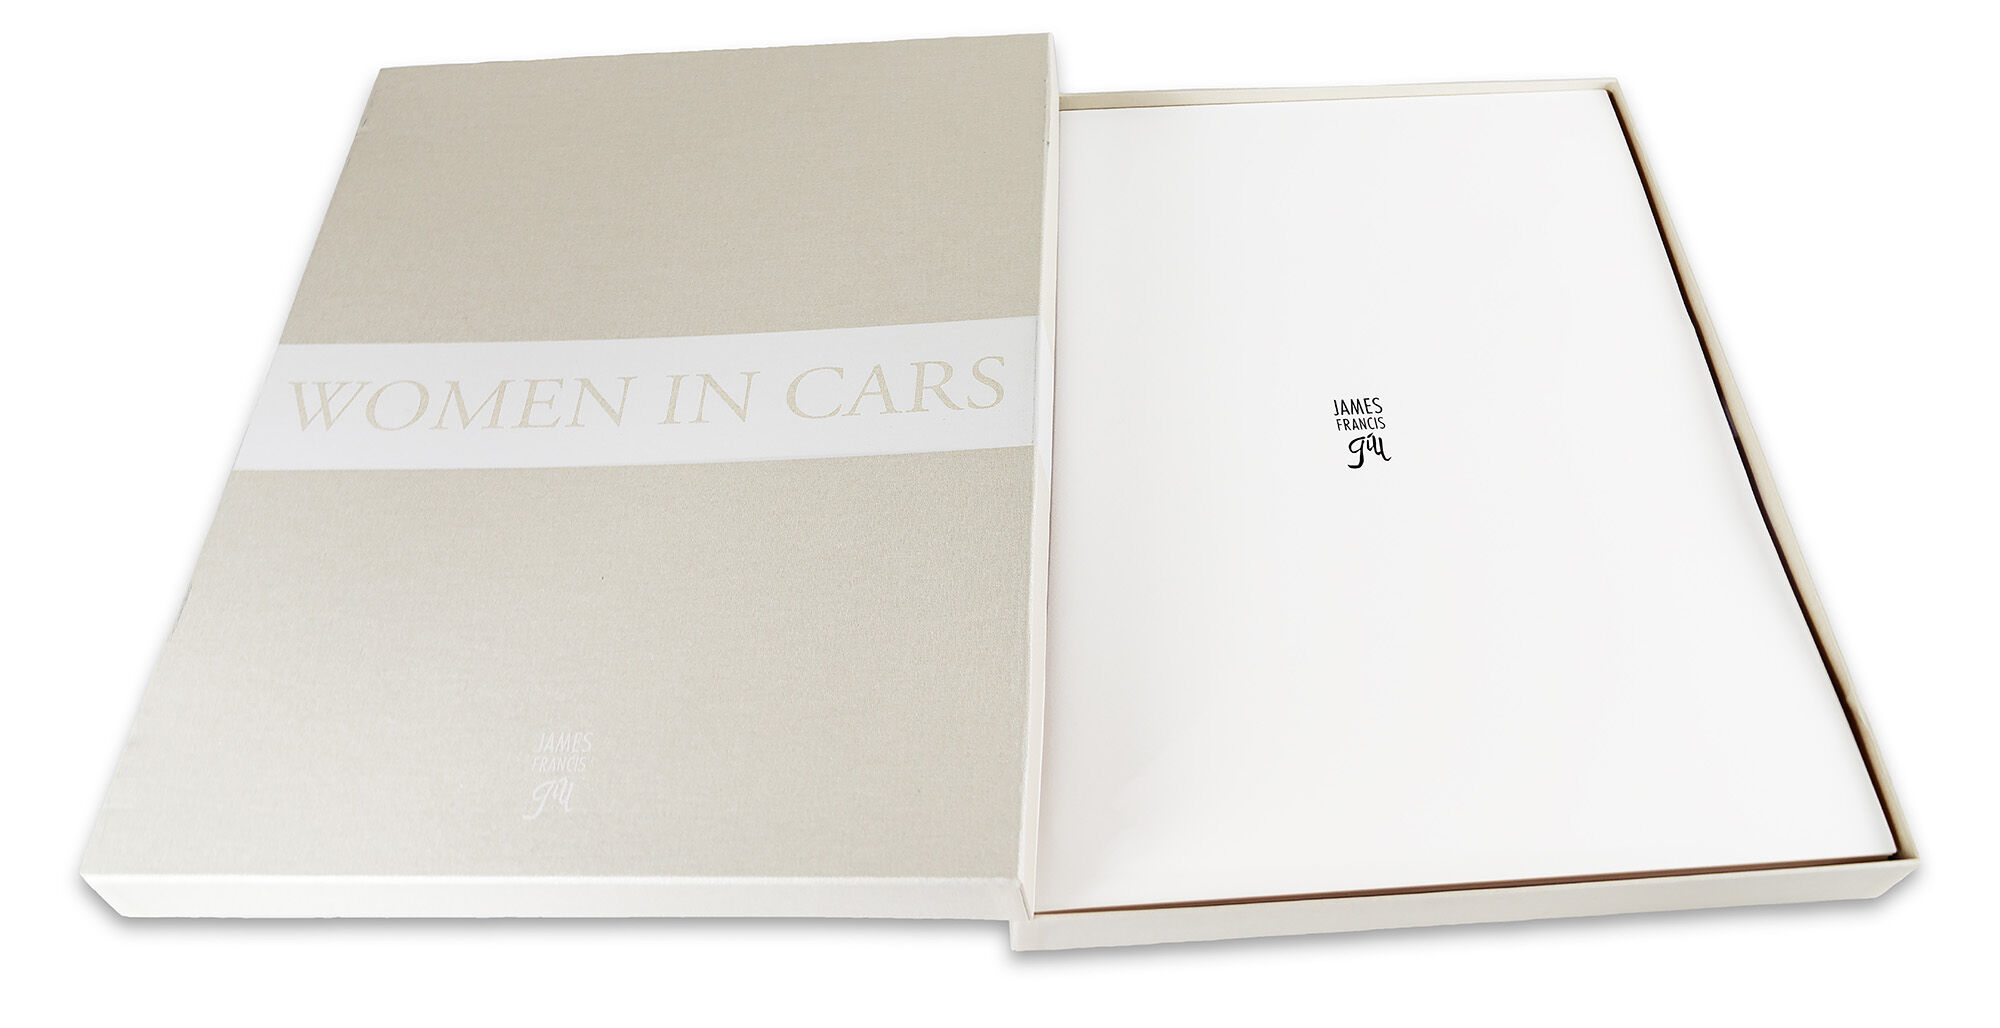 Picture "WOMAN IN CARS BOX-SET 1" (2022) by James Francis Gill